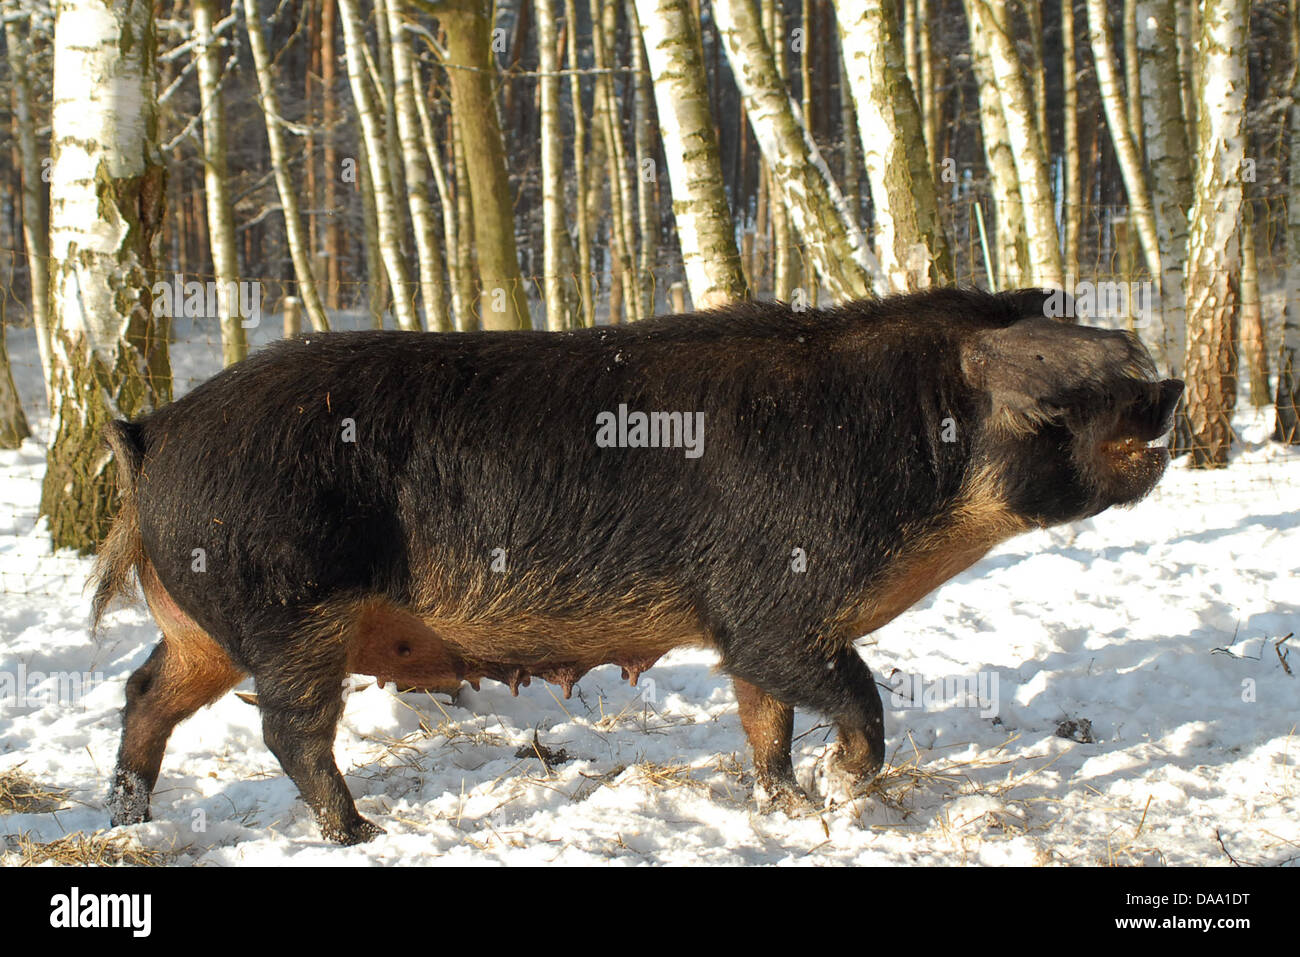 A rare Mangalitza swine stands on a snow-covered field on a farm estate in Amt Neuhaus, Germany 21 December 2010. The 'Gesellschaft zur Erhaltung alter und gefährdeter Haustierrassen' (GEH), a society for the conservation of old breeds of livestock and endangered pets, has launched the Ark Project, which is aimed at preserving traditional and endangered domesticised farm animals on Stock Photo